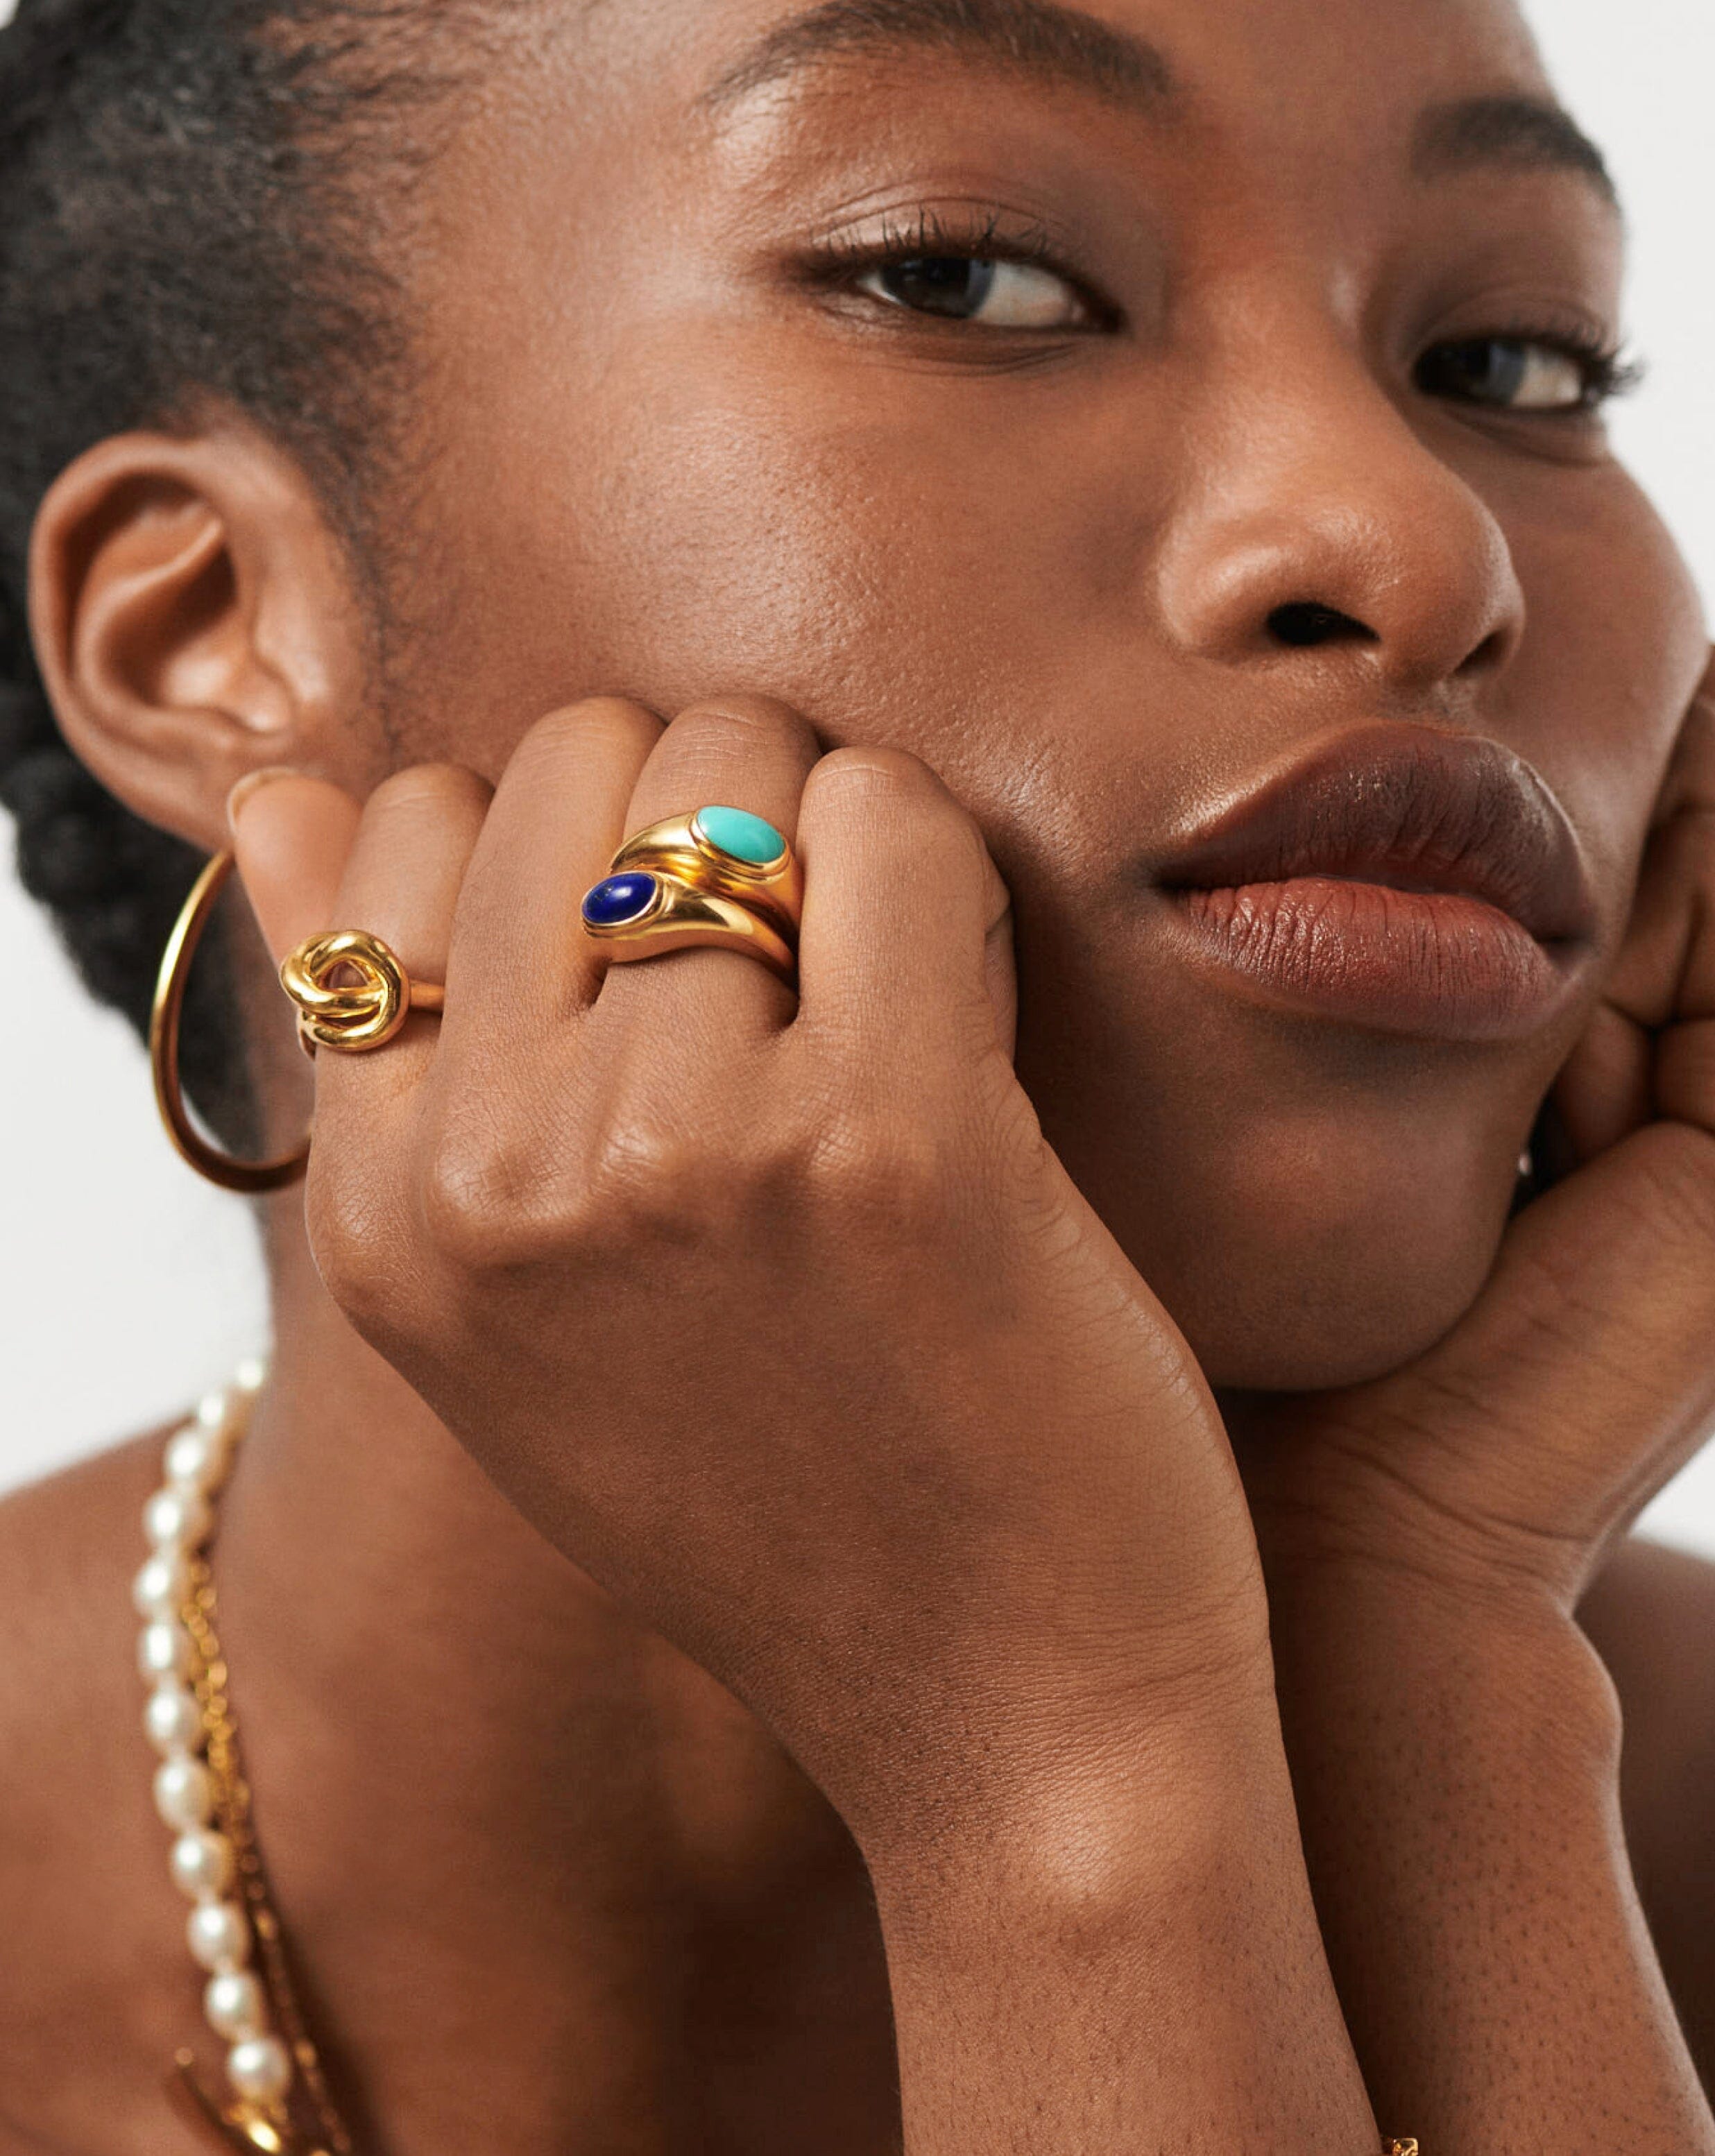 Molten Gemstone Ring | 18ct Gold Plated Vermeil/Lapis Rings Missoma 